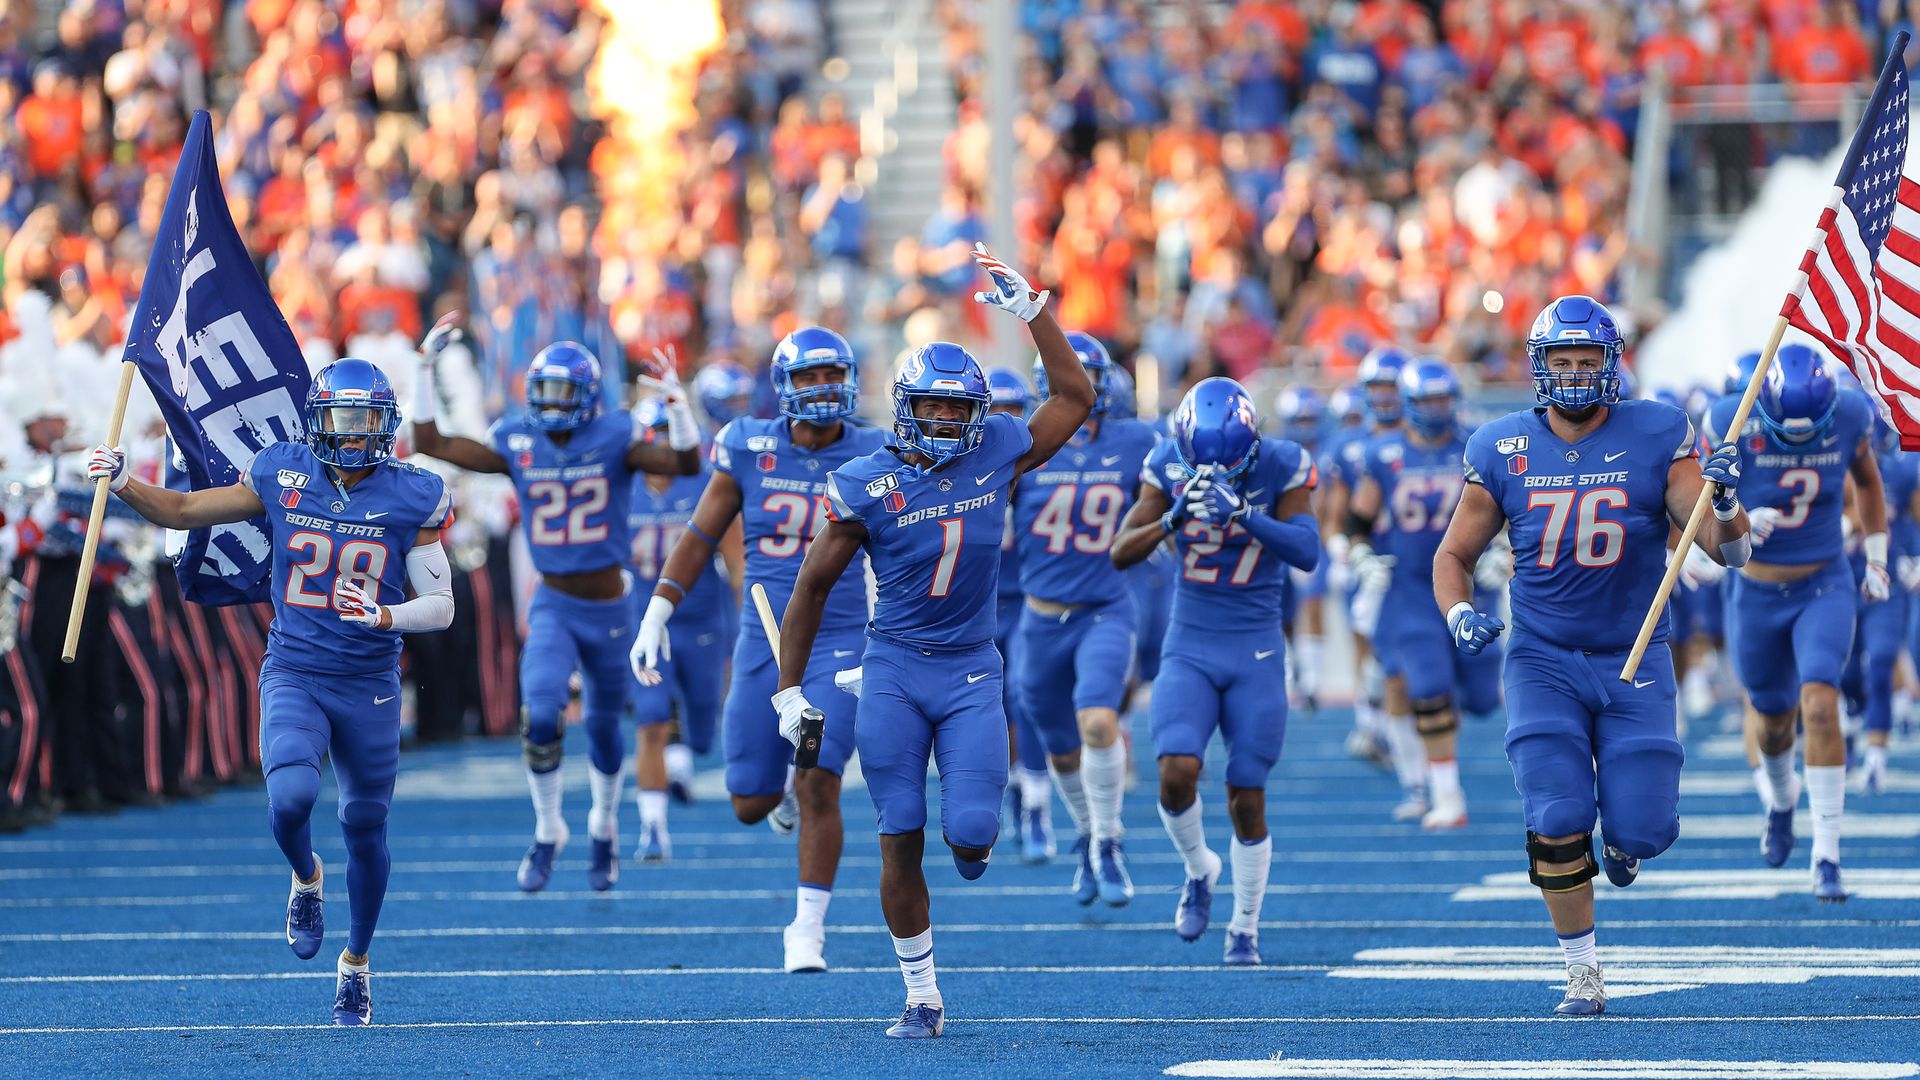 Boise State running onto the field